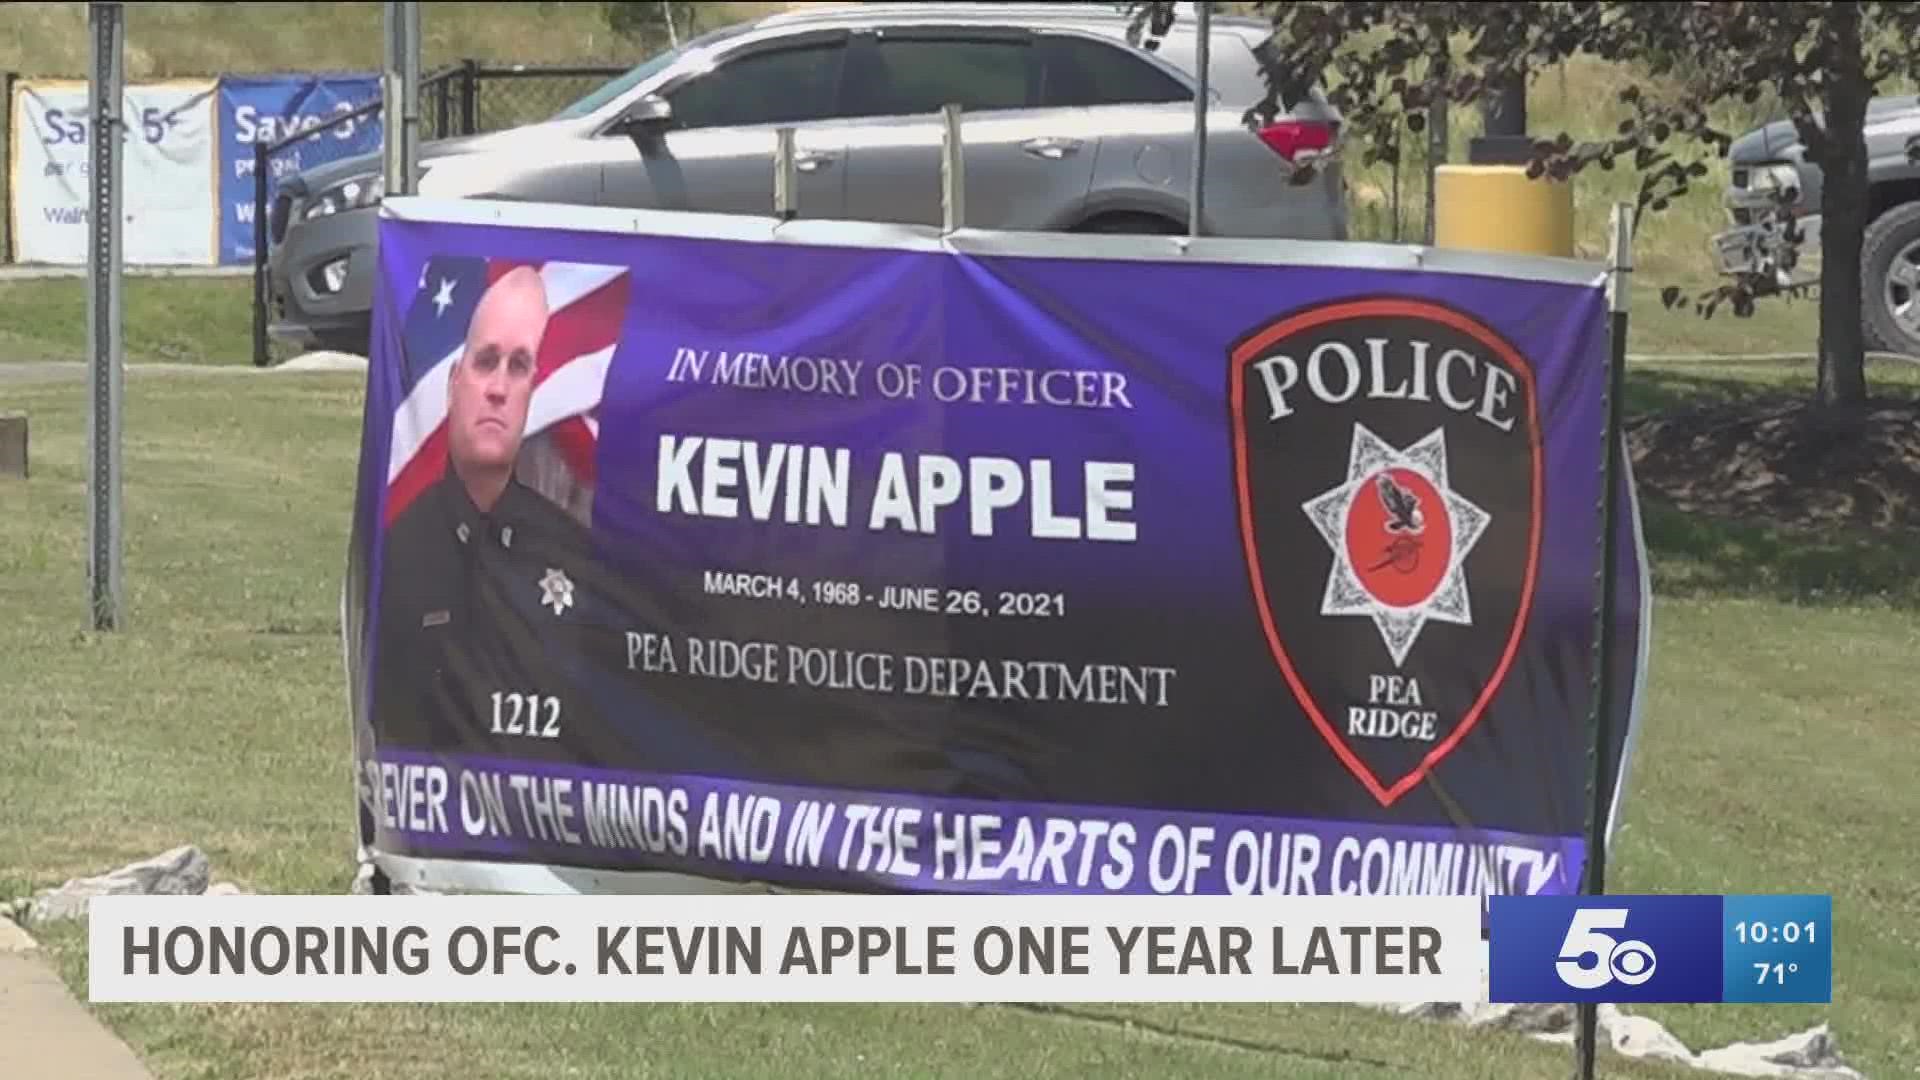 First responders and residents of Pea Ridge gathered at the White Oak station, where officer Apple died, for a moment of silence.